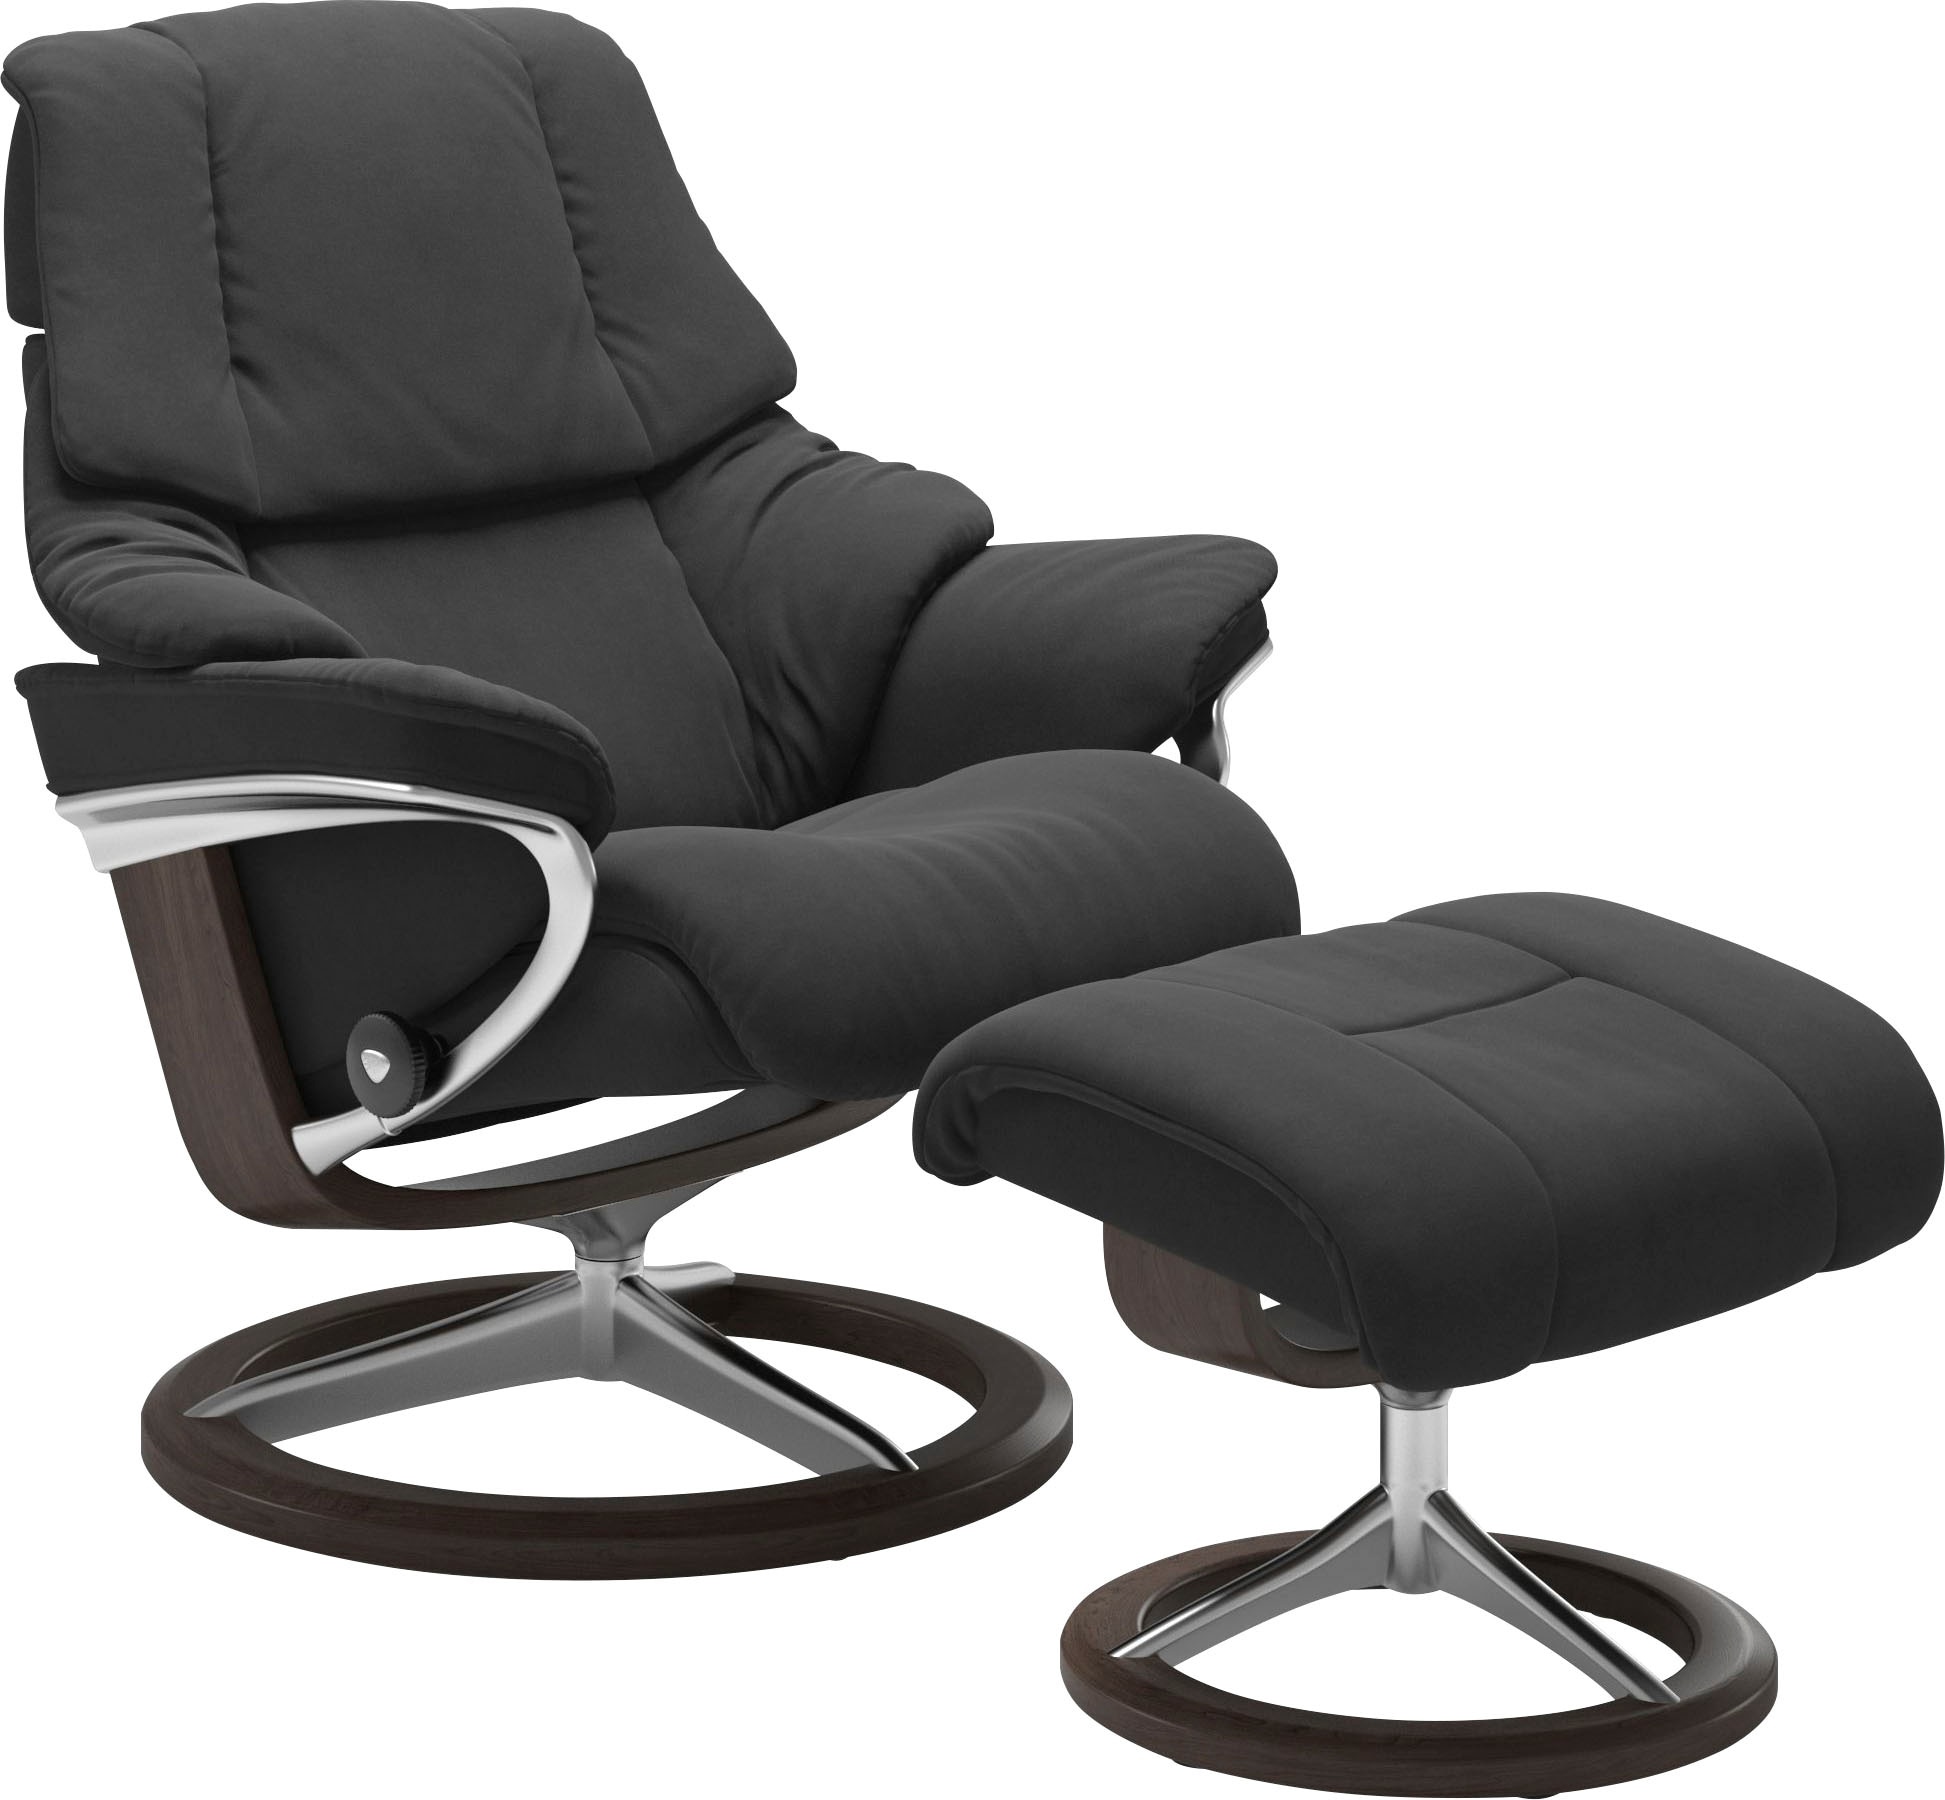 Relaxsessel STRESSLESS "Reno" Sessel Gr. Microfaser DINAMICA, Signature Base Wenge, Relaxfunktion-Drehfunktion-PlusTMSystem-Gleitsystem-BalanceAdaptTM, B/H/T: 83 cm x 100 cm x 76 cm, grau (charcoal dinamica) Lesesessel und Relaxsessel